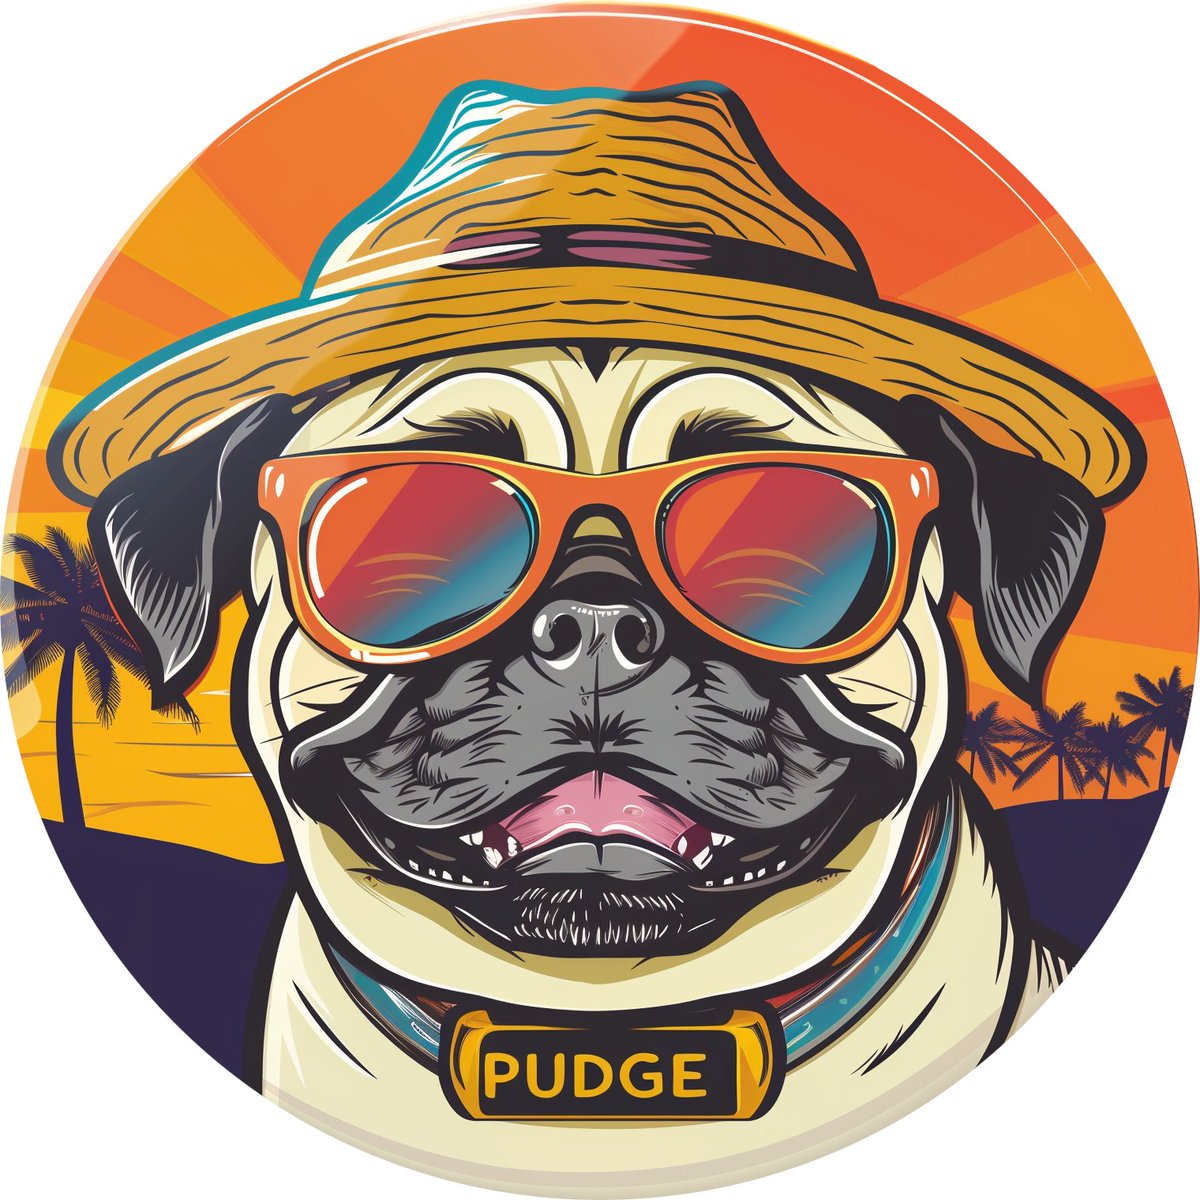 We've told you we'd be working towards that @Blast_L2 Gold Jackpot for the #PugLife community & exactly that we are. 🤝

You've missed the $PAC and $BIG #Airdrop? Then let us introduce $PUDGE - the official PugLife meme token, launching Wednesday/Thursday next week! 🔥

👉We've